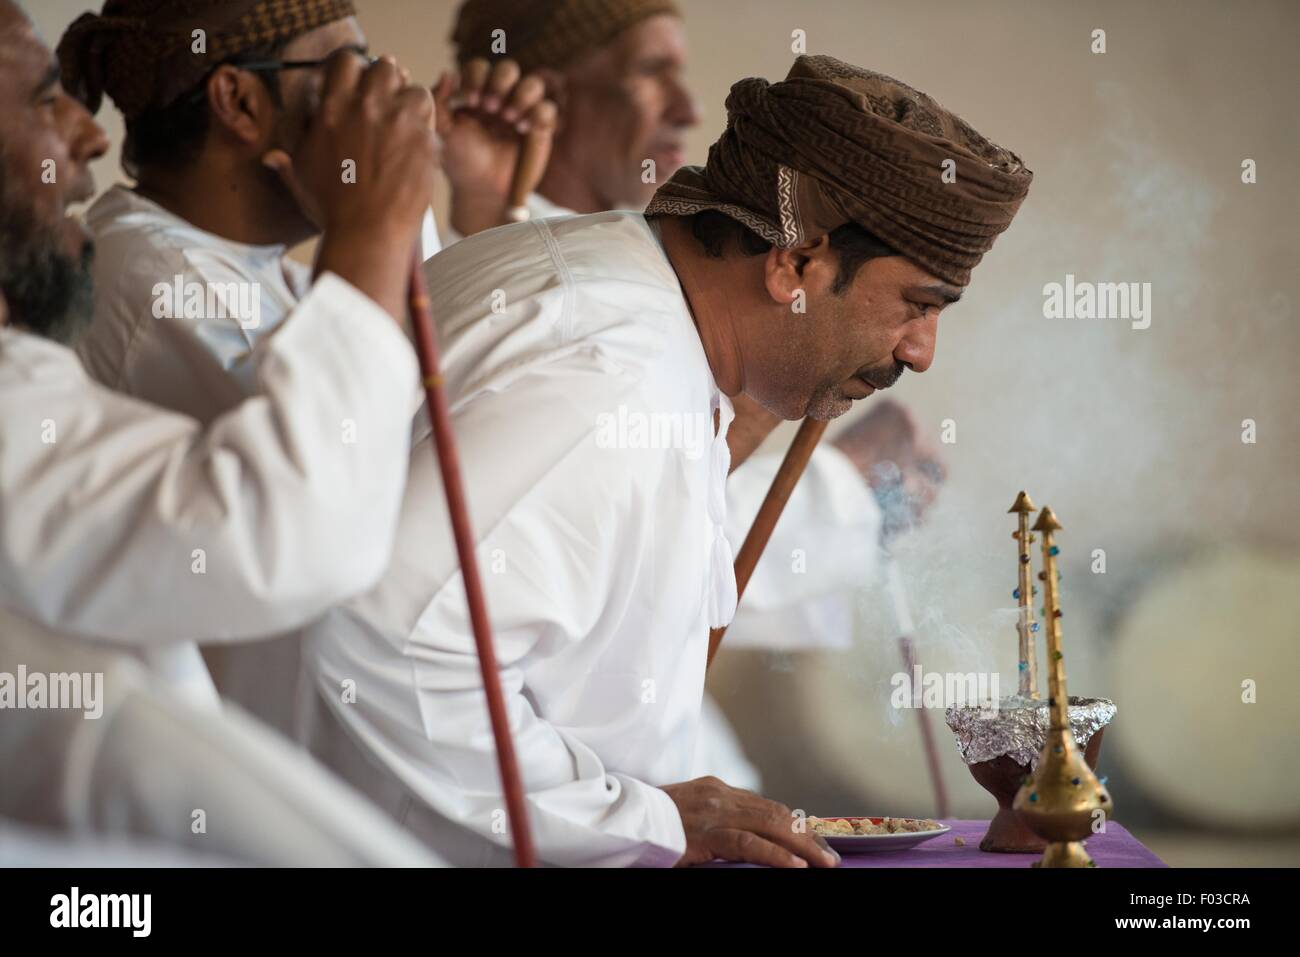 Men performing a ritual at a festival outside of Muscat, Oman. Stock Photo